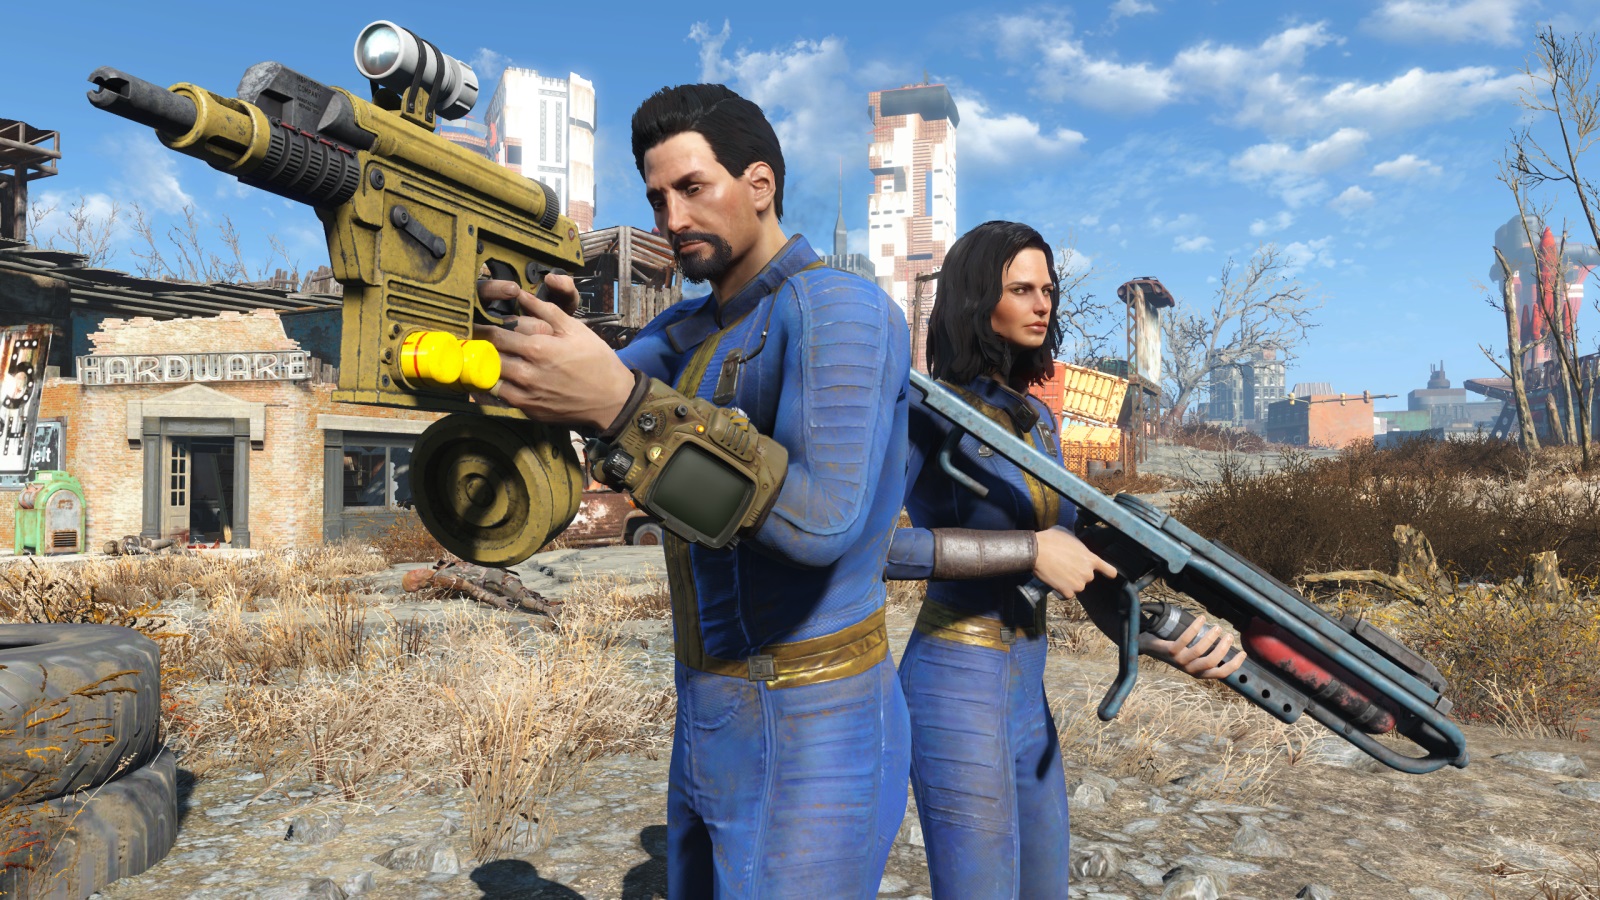 Fallout 4 is getting a free “Next-Gen” update on PC and consoles